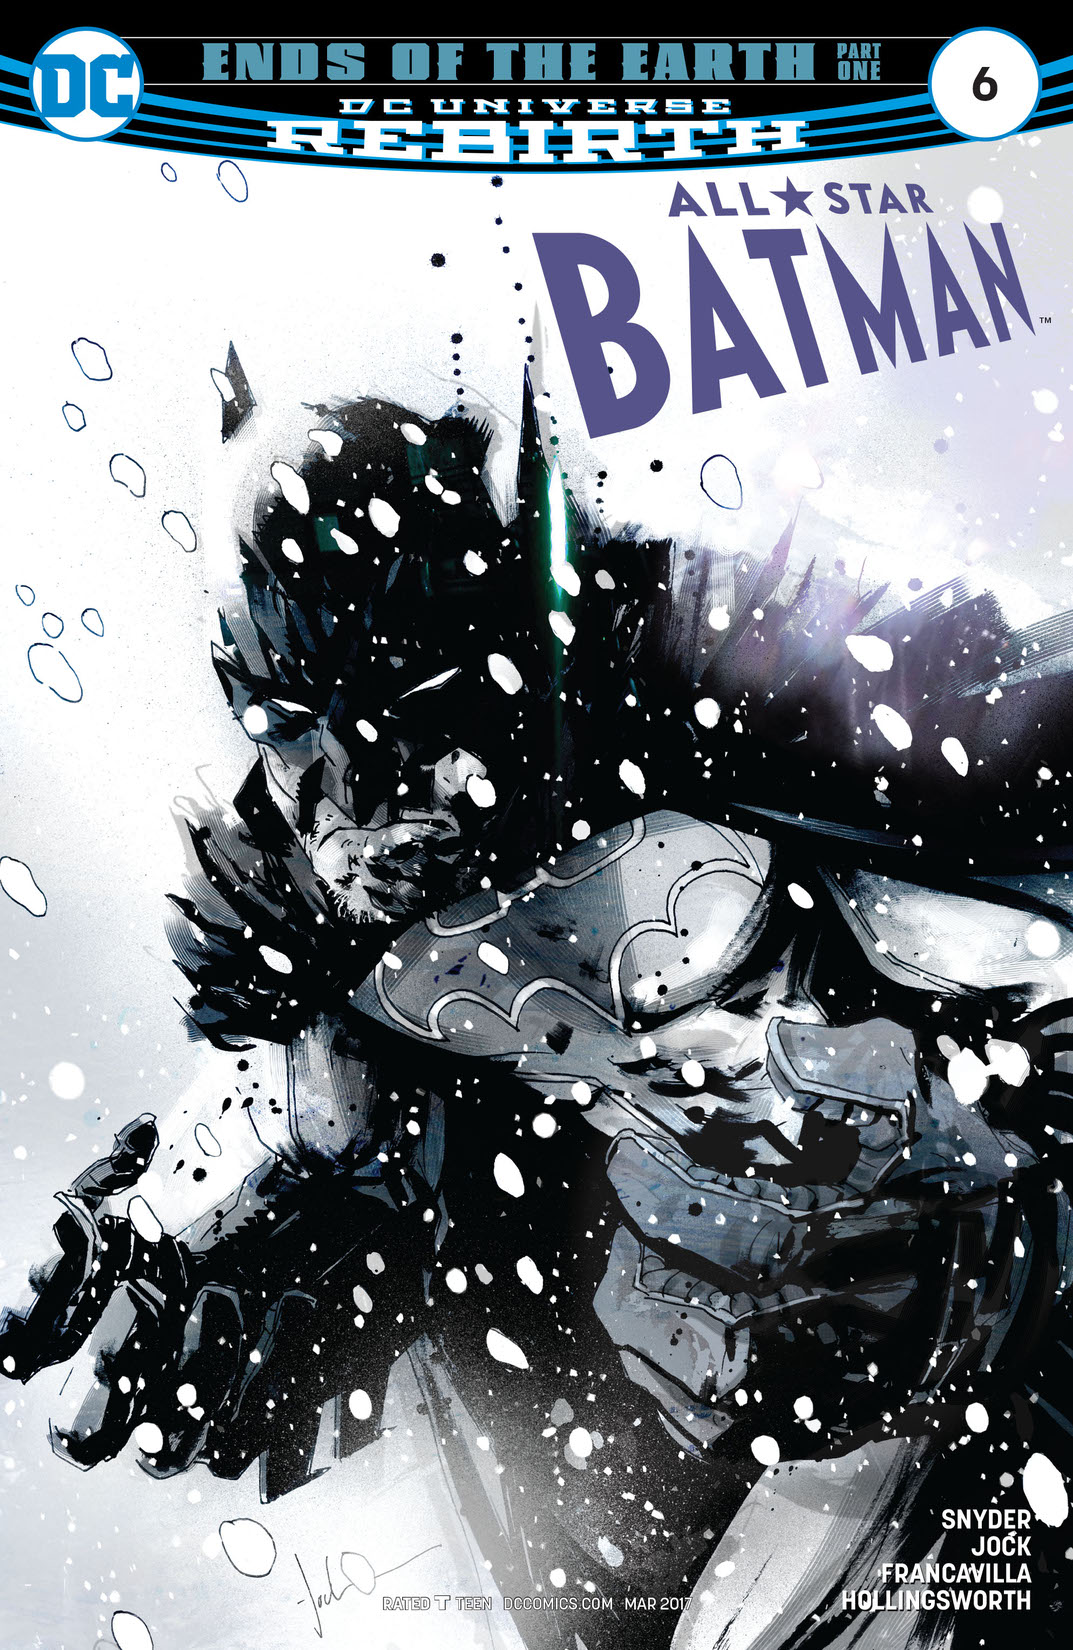 All Star Batman #6 preview images